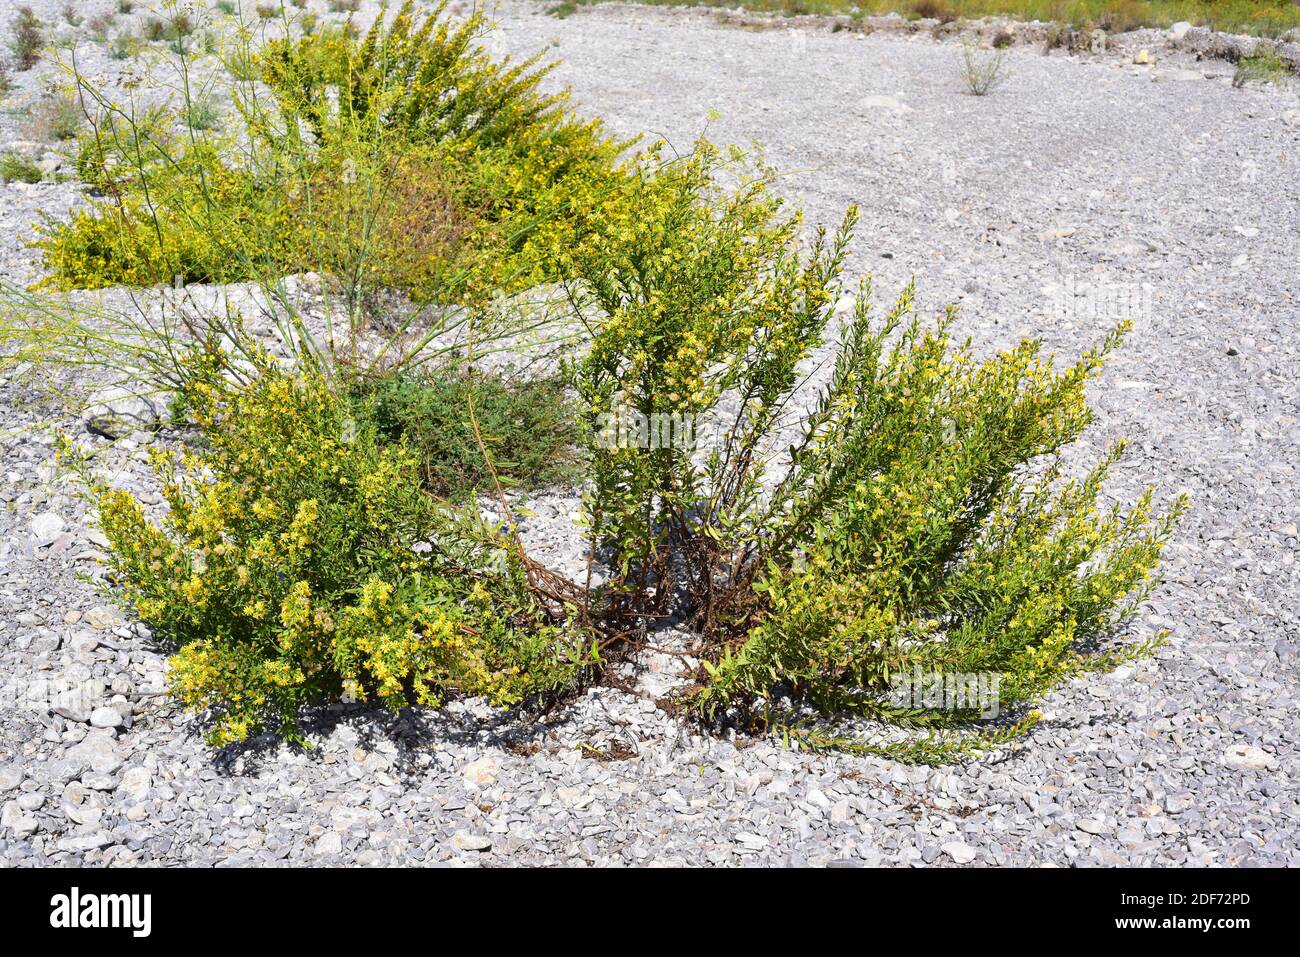 False yellowhead or sticky fleabane (Dittrichia viscosa or Inula viscosa) is a perennial plant native to Mediterranean Basin. This photo was taken in Stock Photo